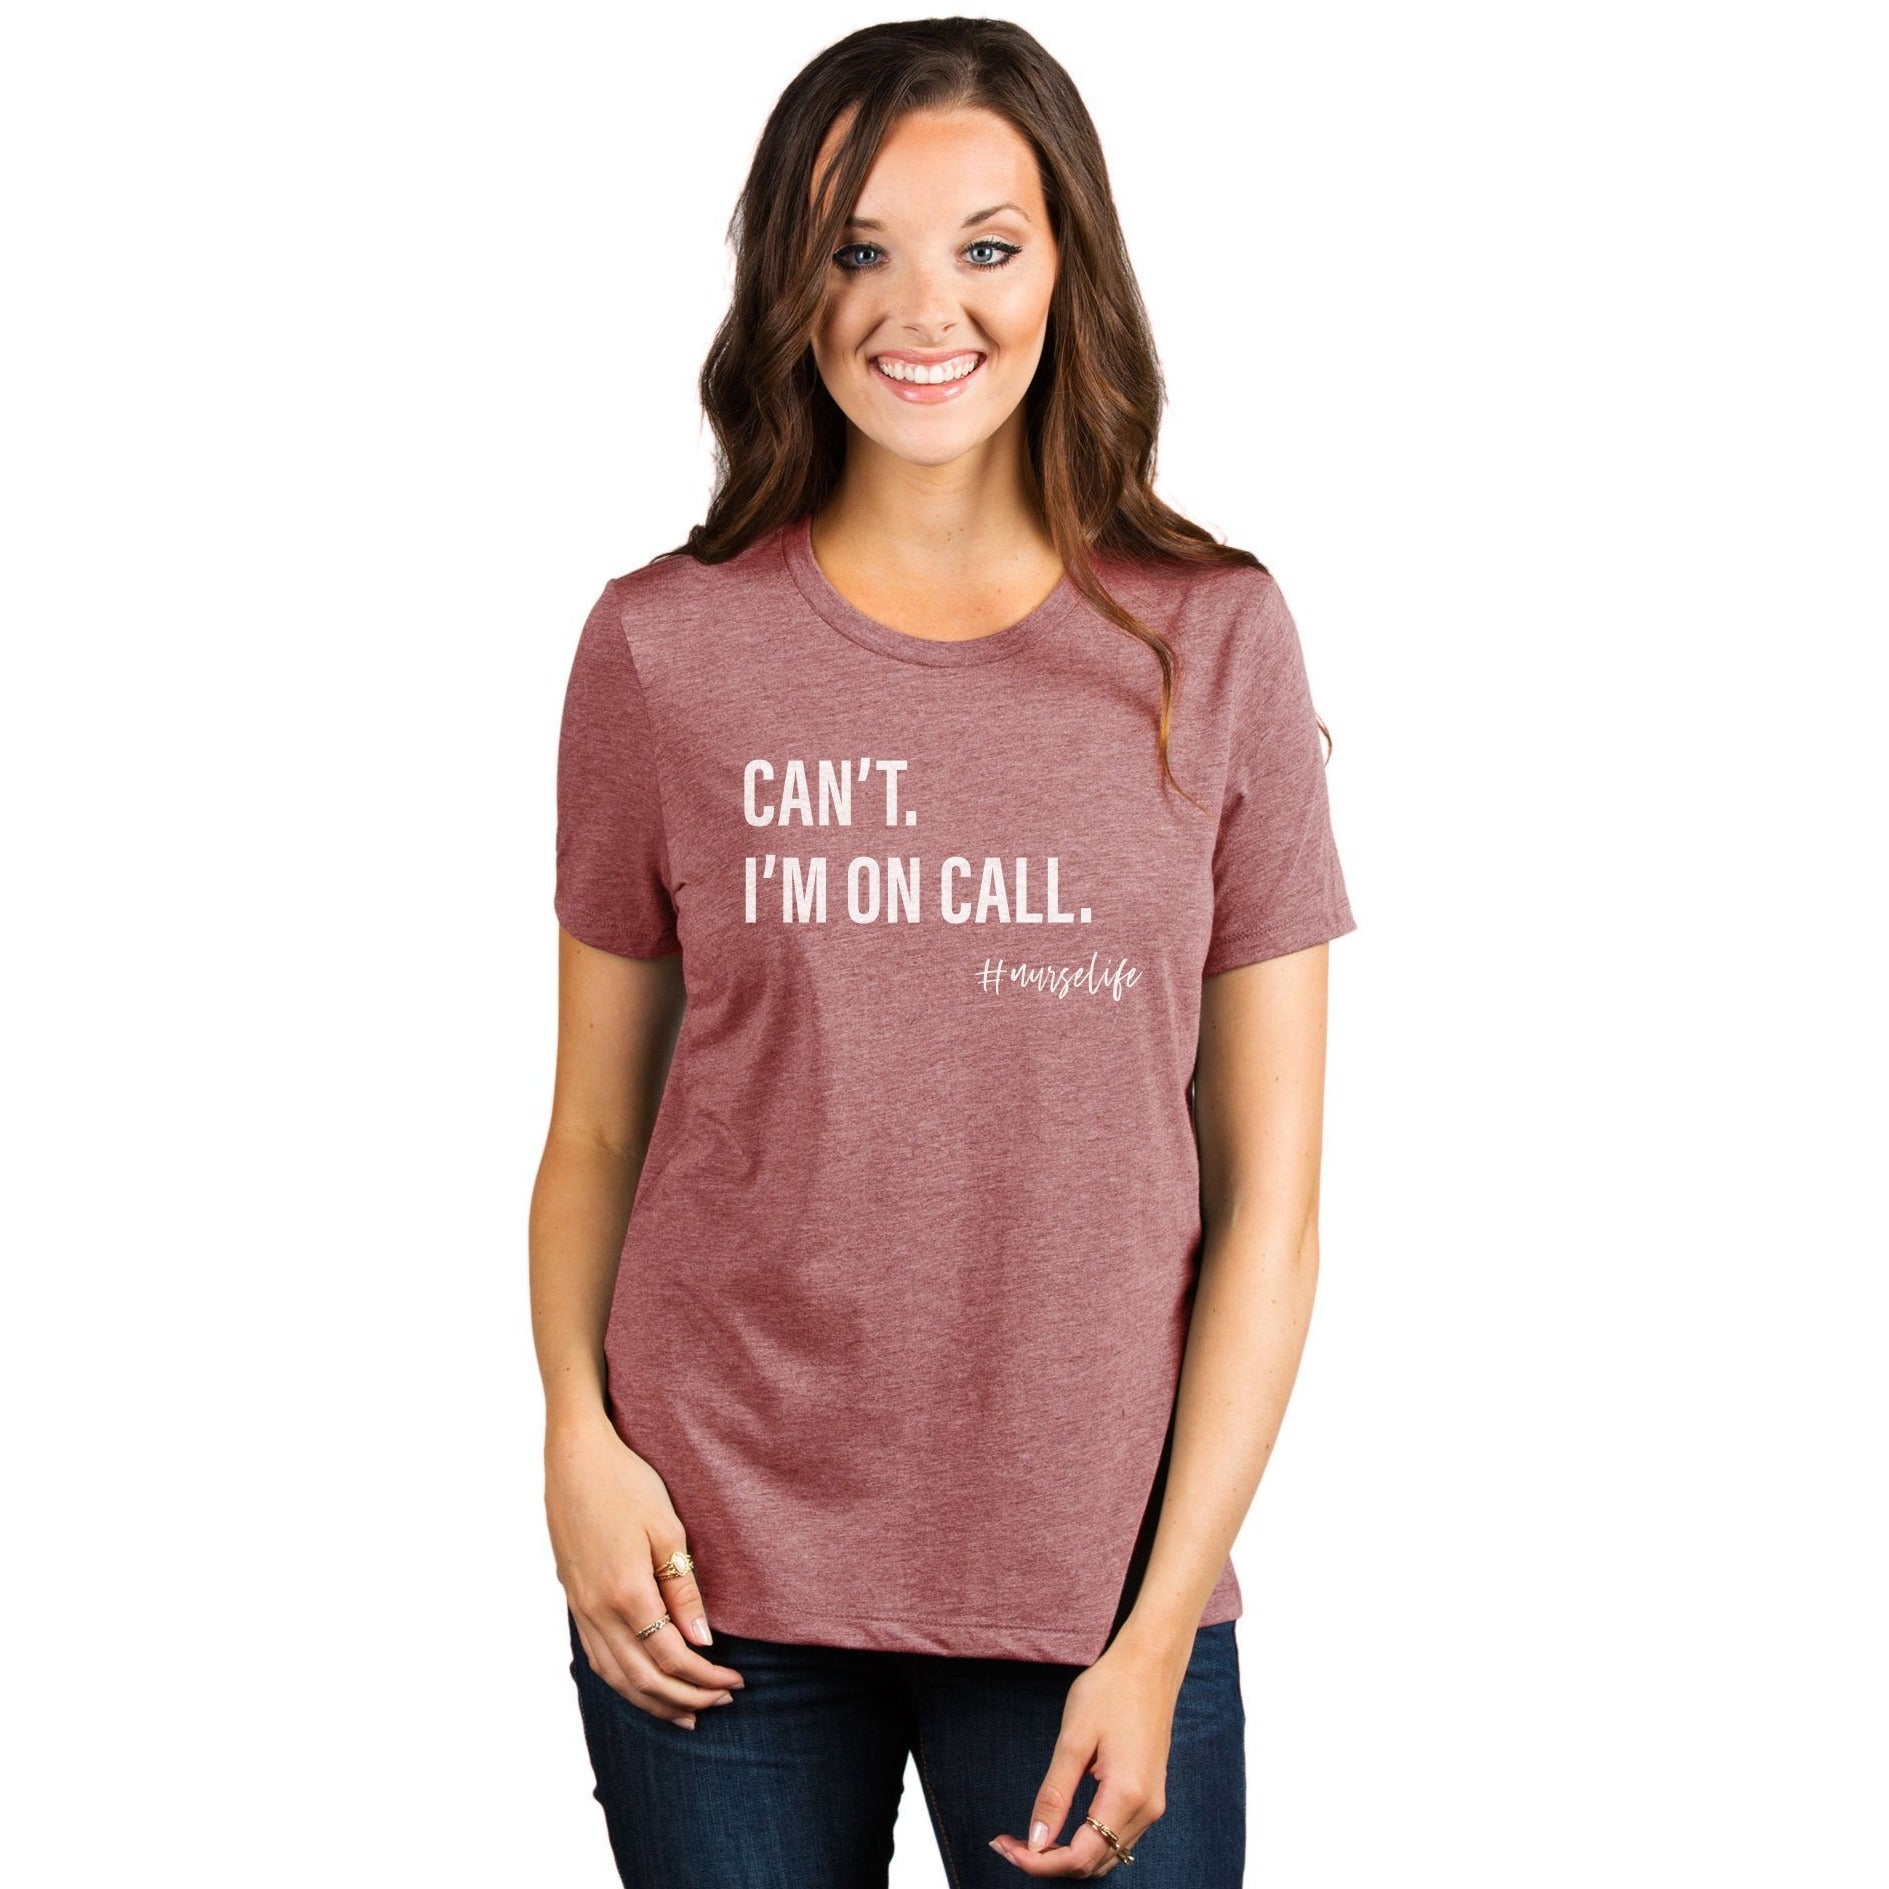 Can't I'm On Call Nurse Life Women's Relaxed Crewneck T-Shirt Top Tee Heather Rouge Model
